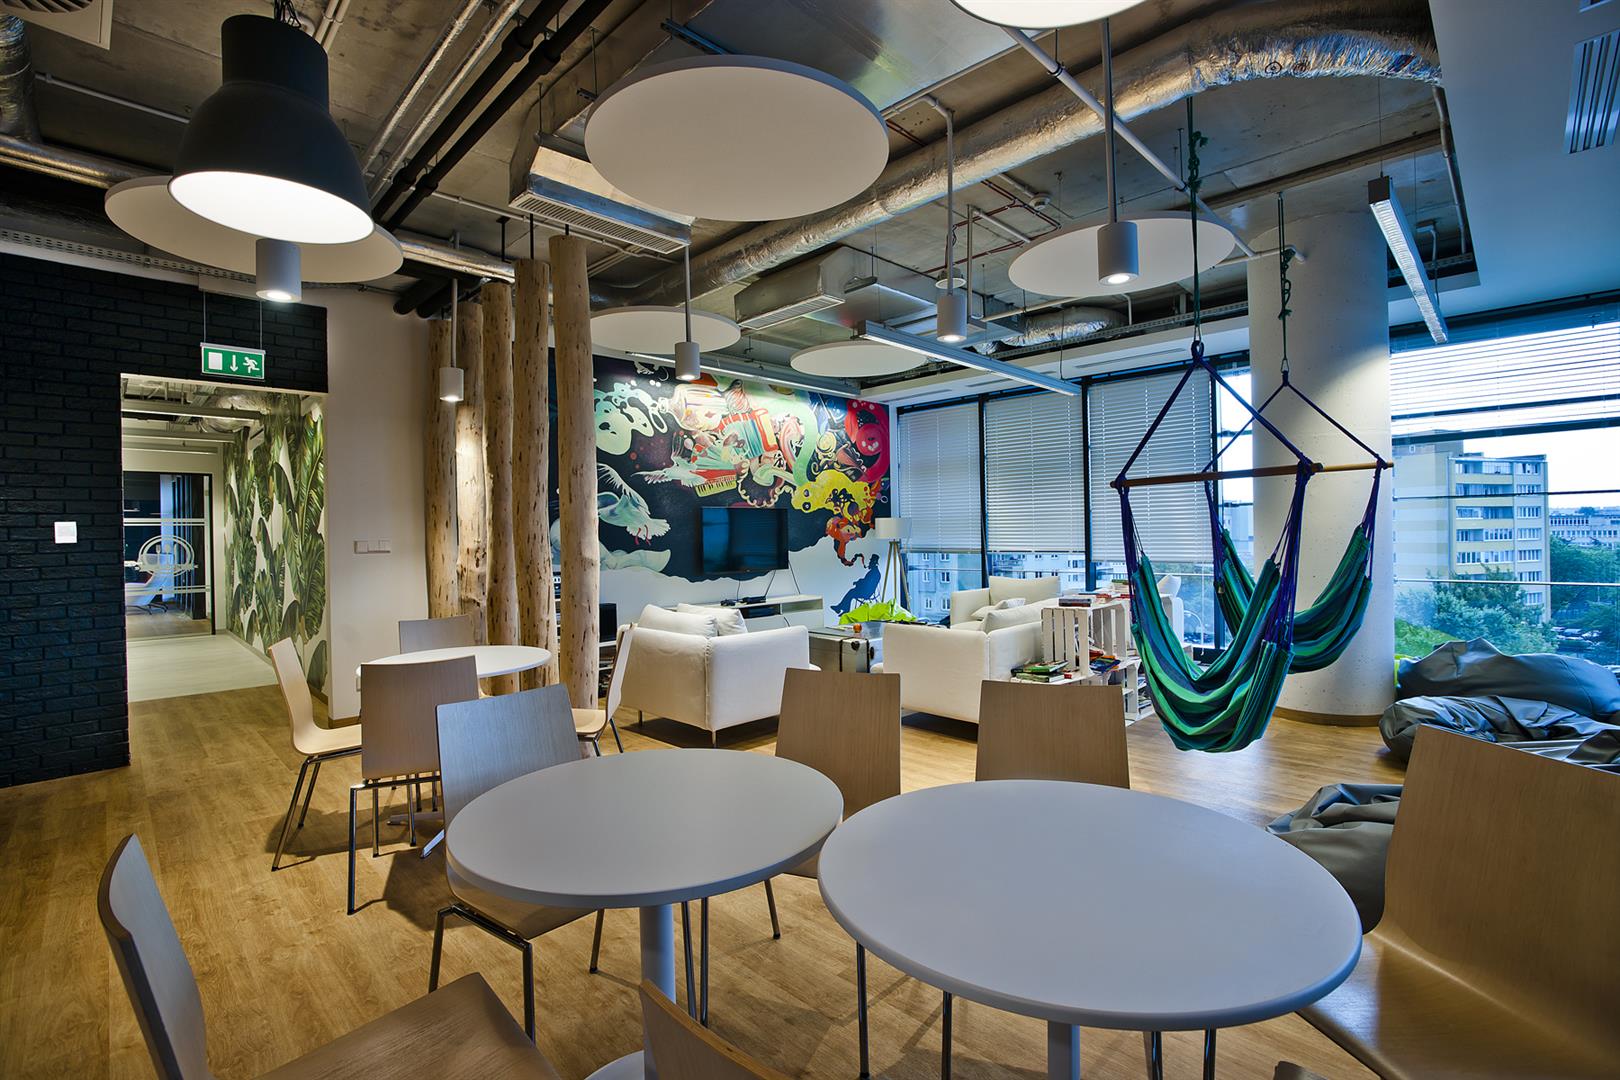 A homely atmosphere complete with Brazilian hammock chairs at the Sage offices in Warsaw, Poland